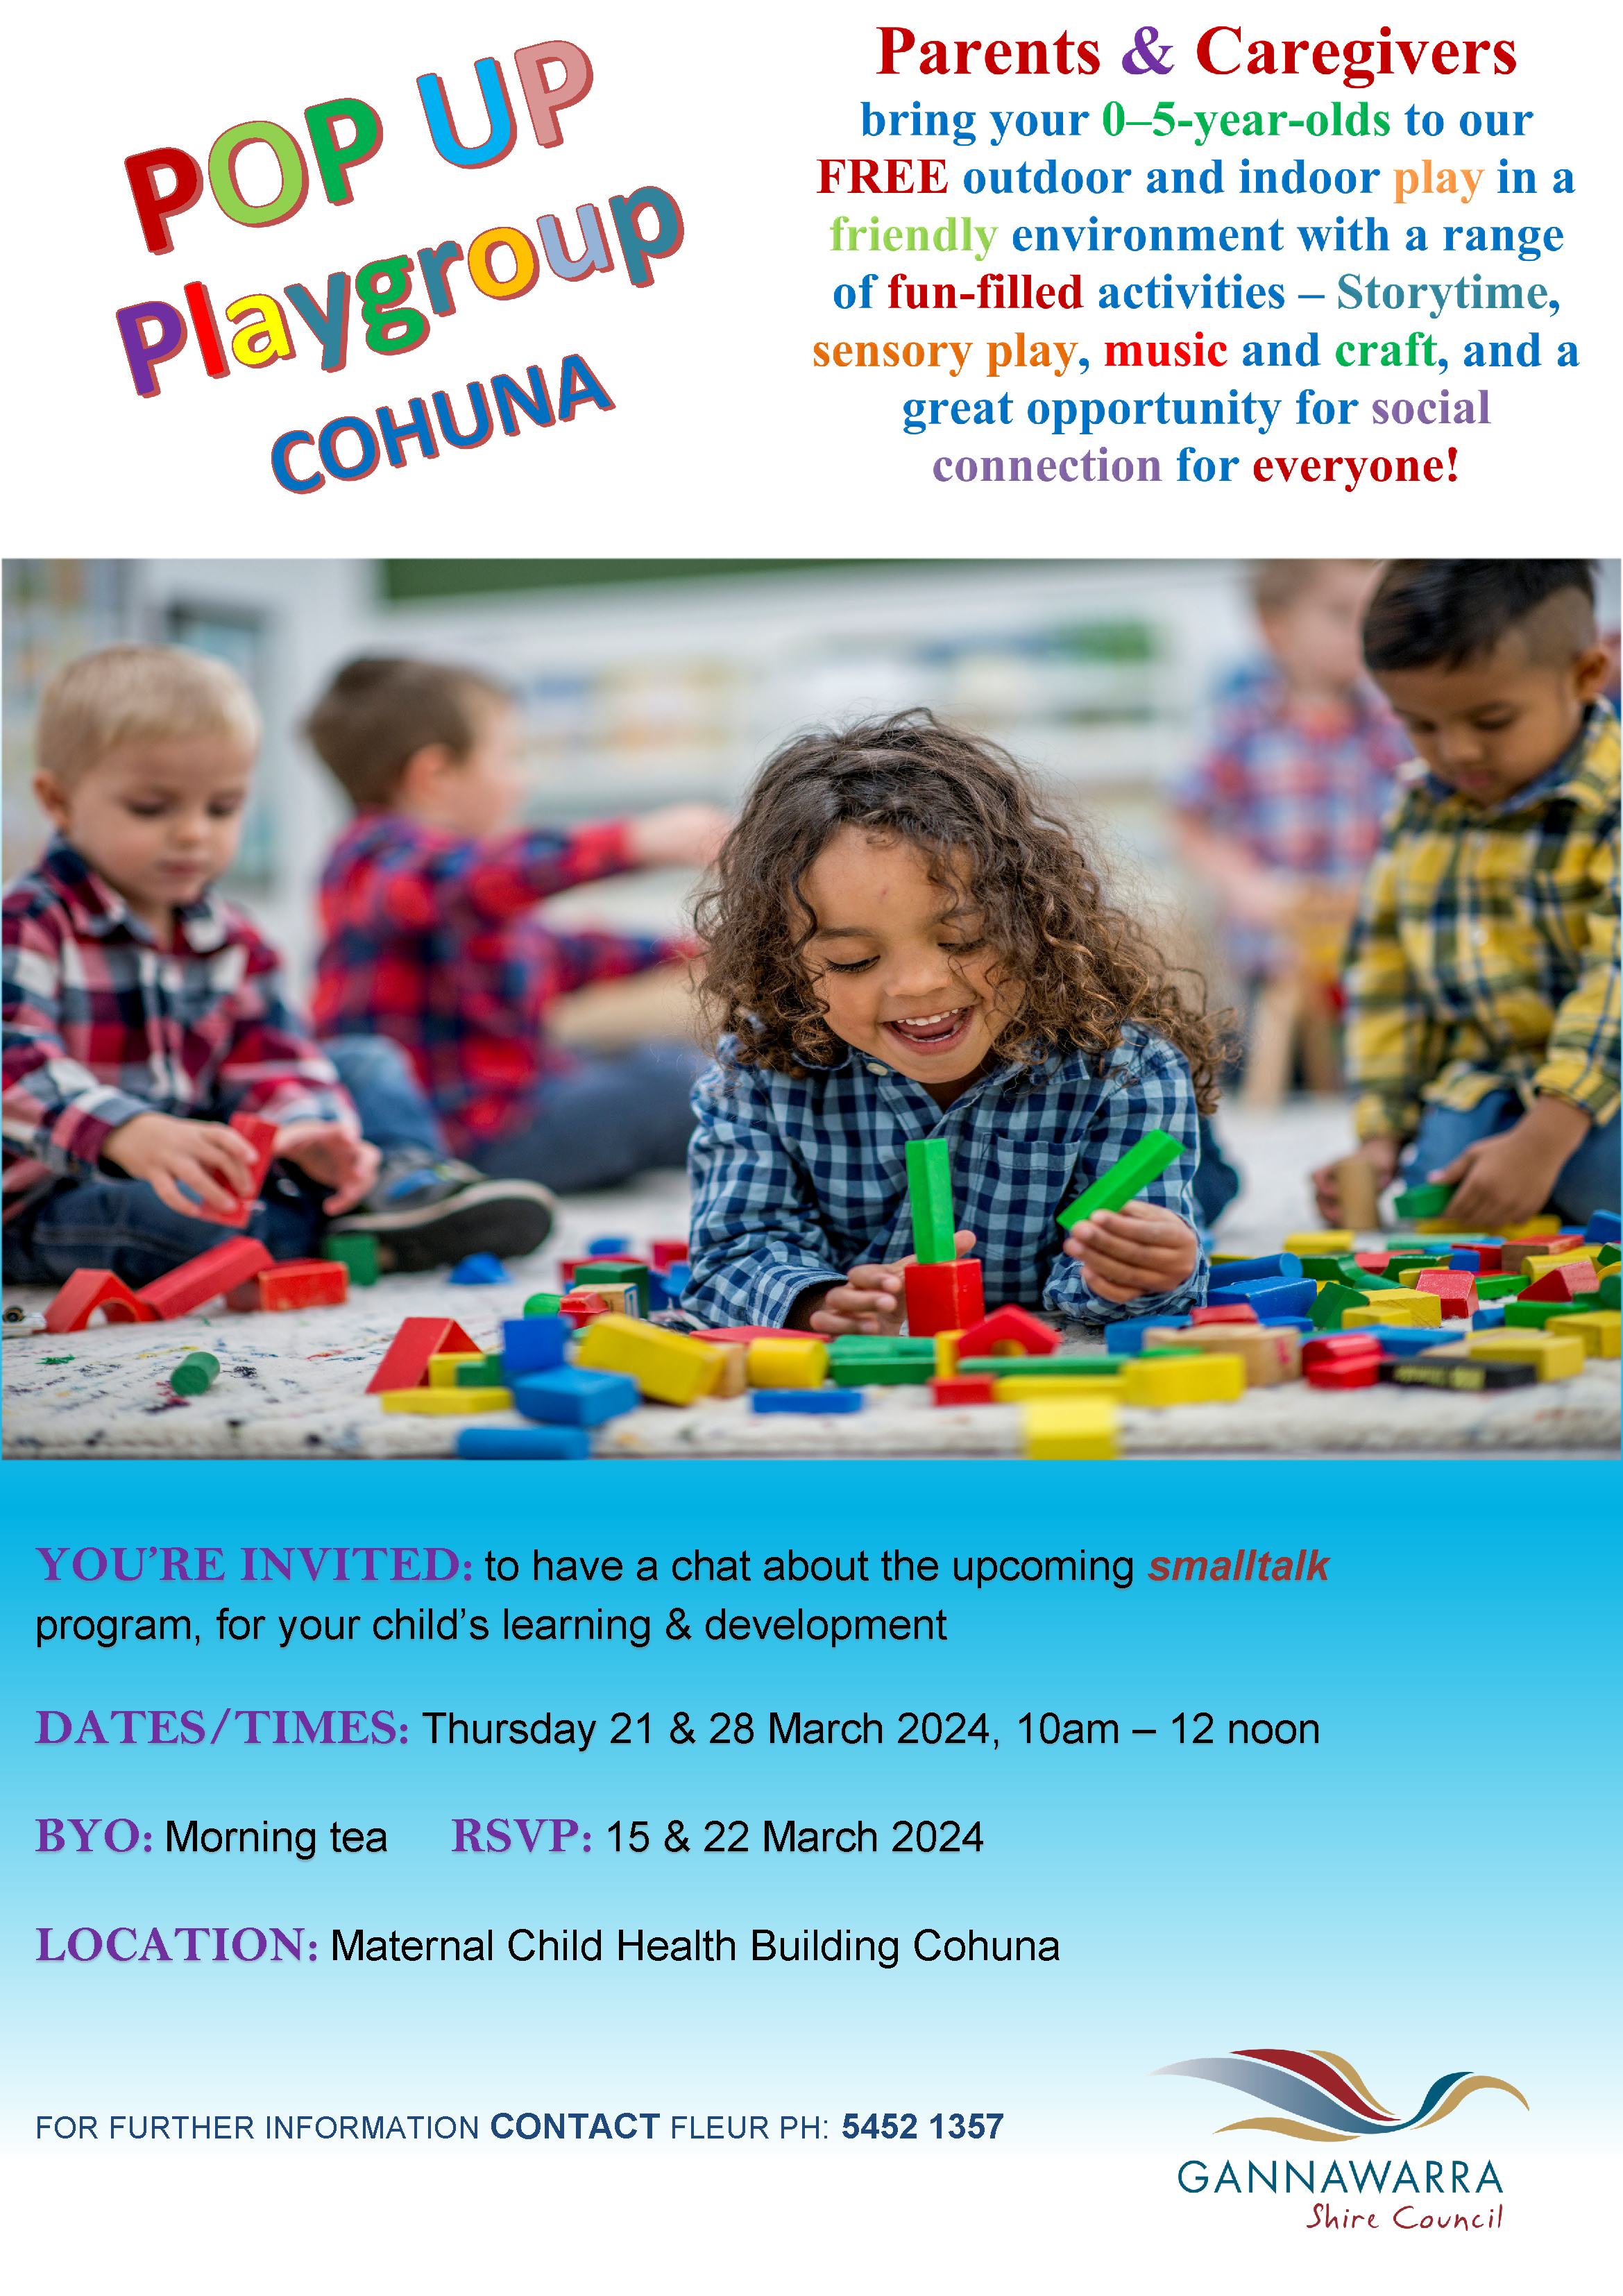 Pop up Playgroup Cohuna Event Poster 2024.png